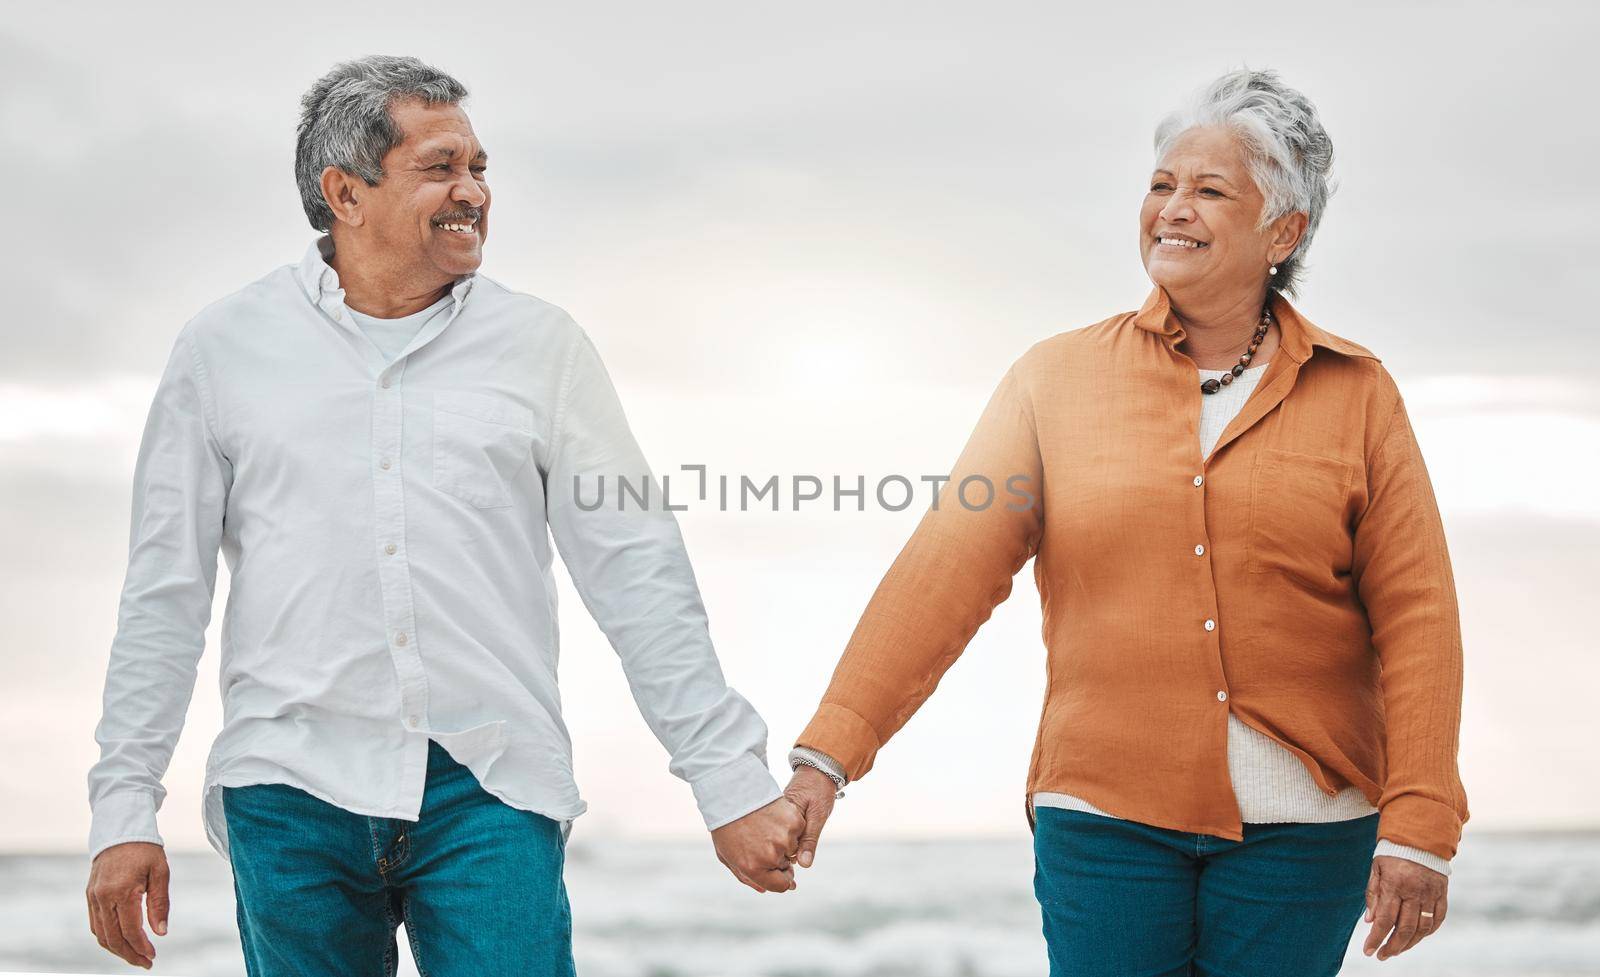 Romance never dies. an affectionate senior couple sharing an intimate moment on the beach